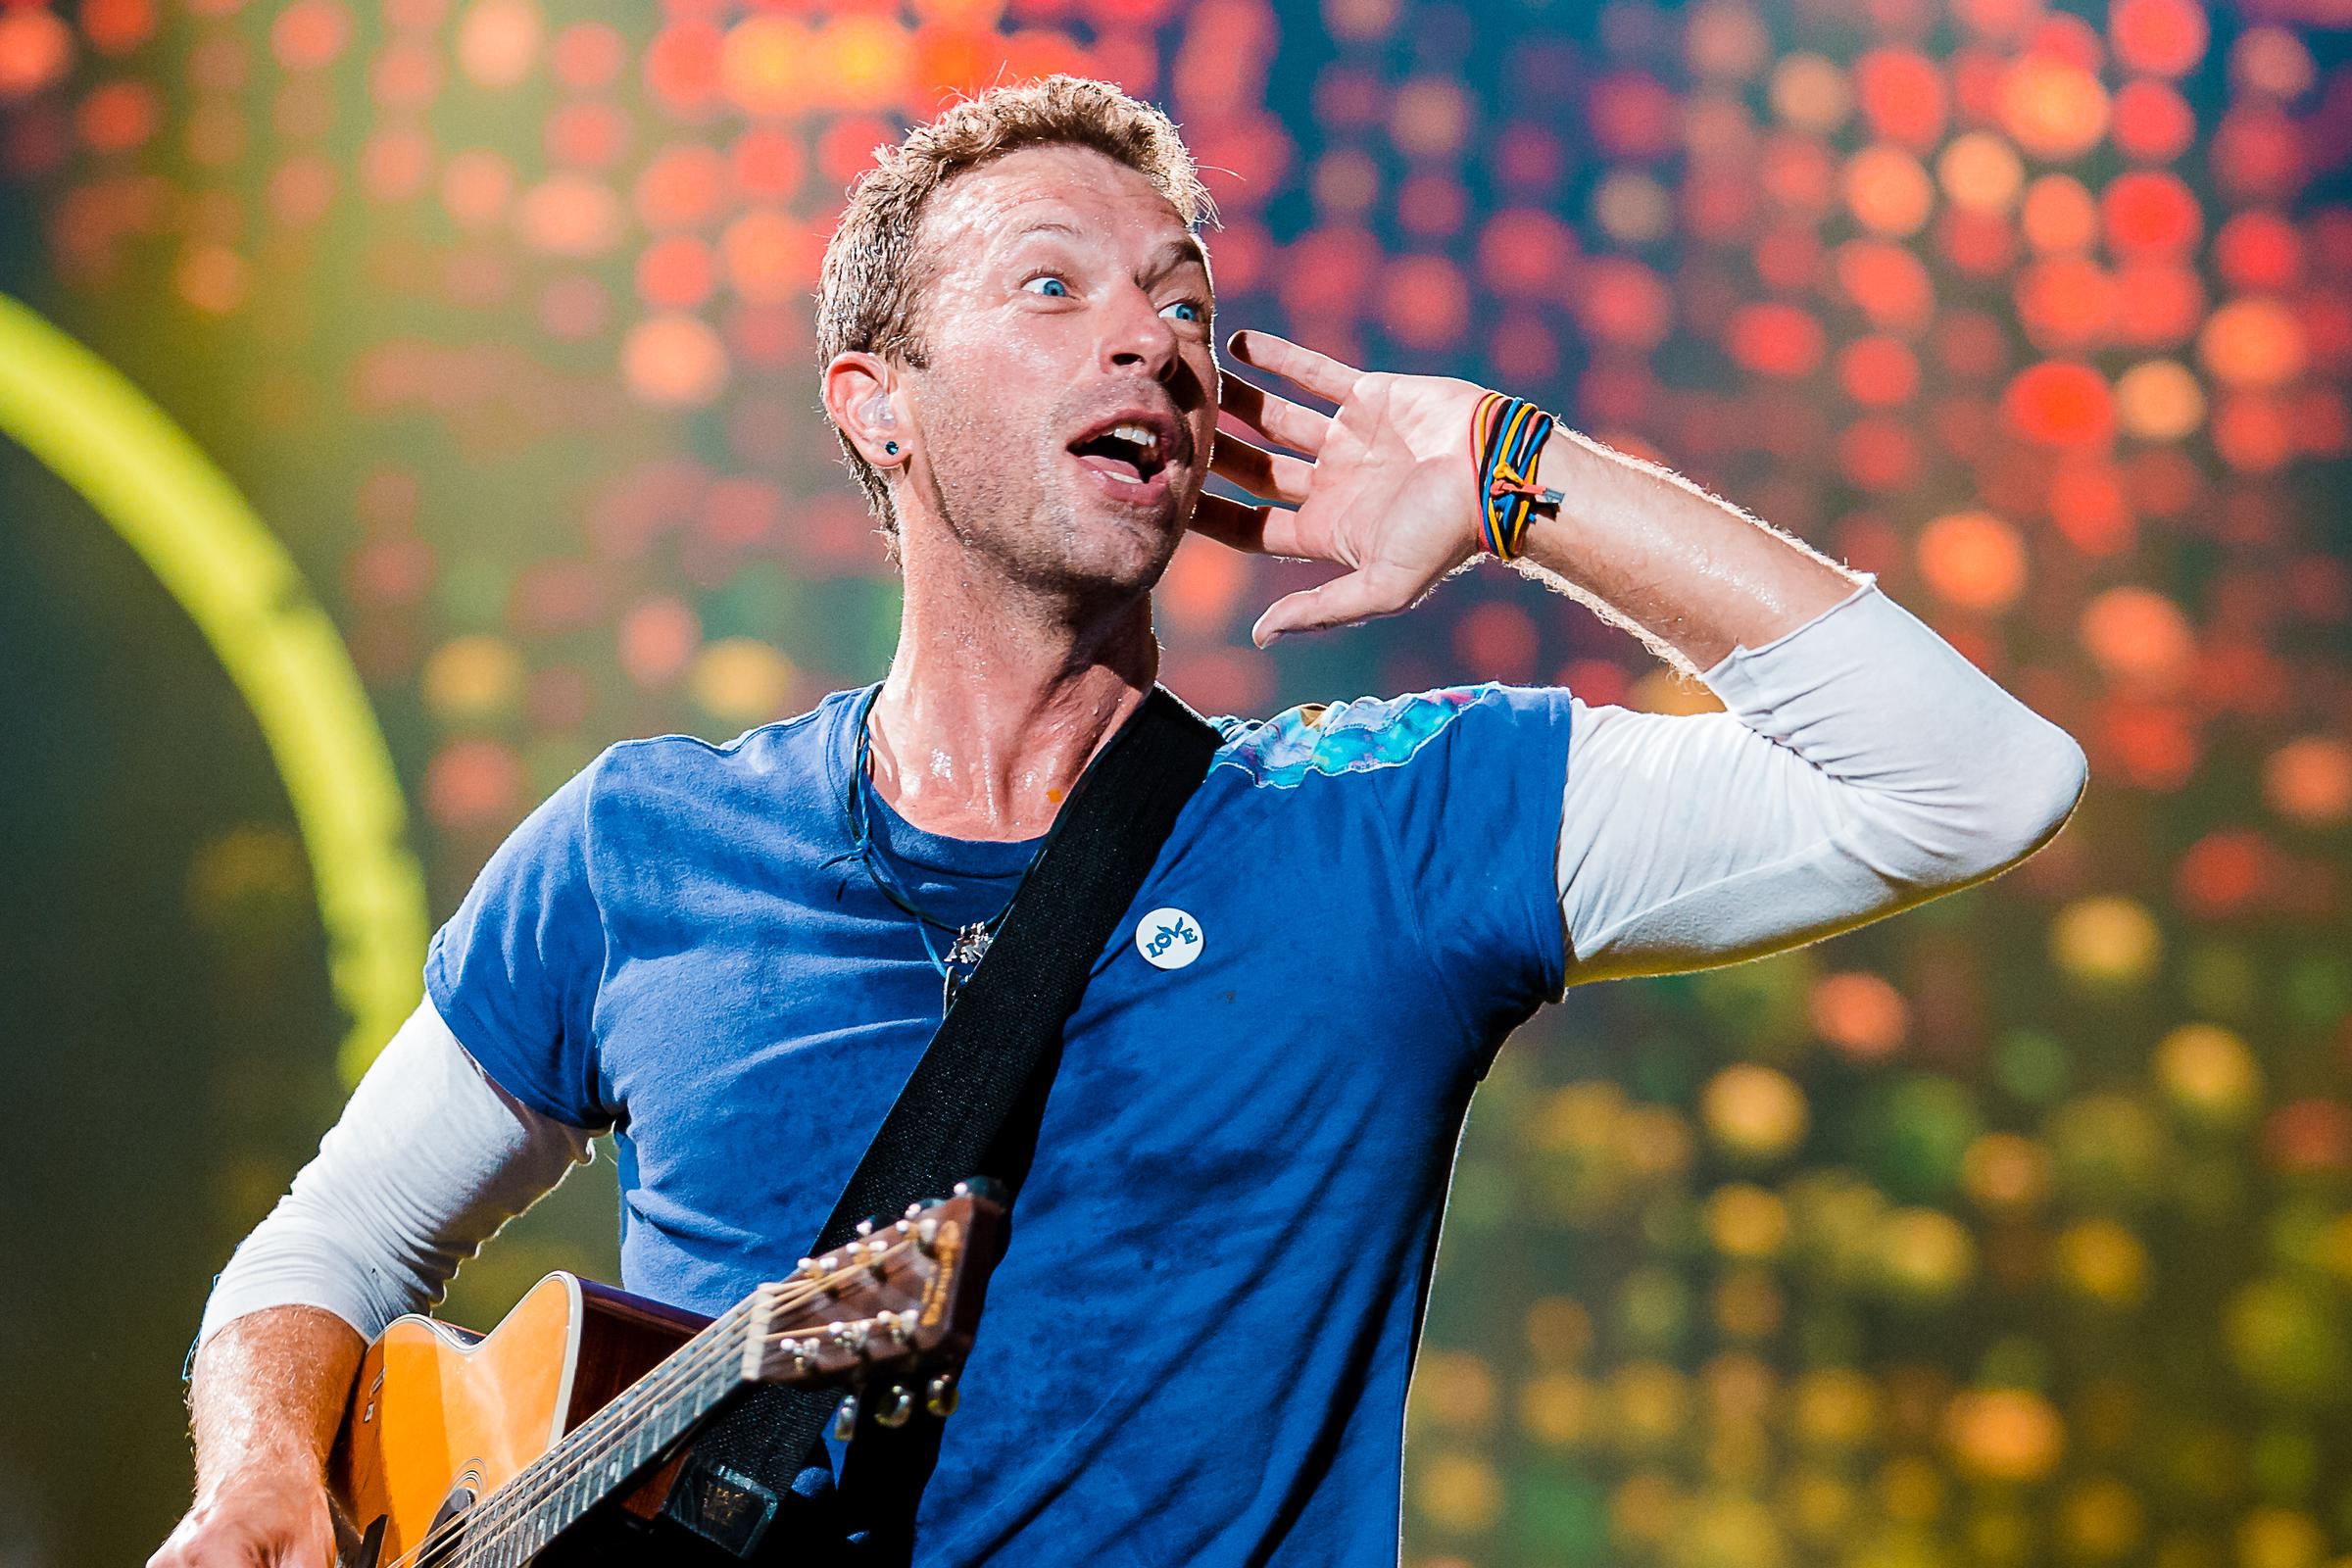 Chris Martin performs with Coldplay live in Sao Paulo, Brazil on November 7, 2017. | Source: Getty Images